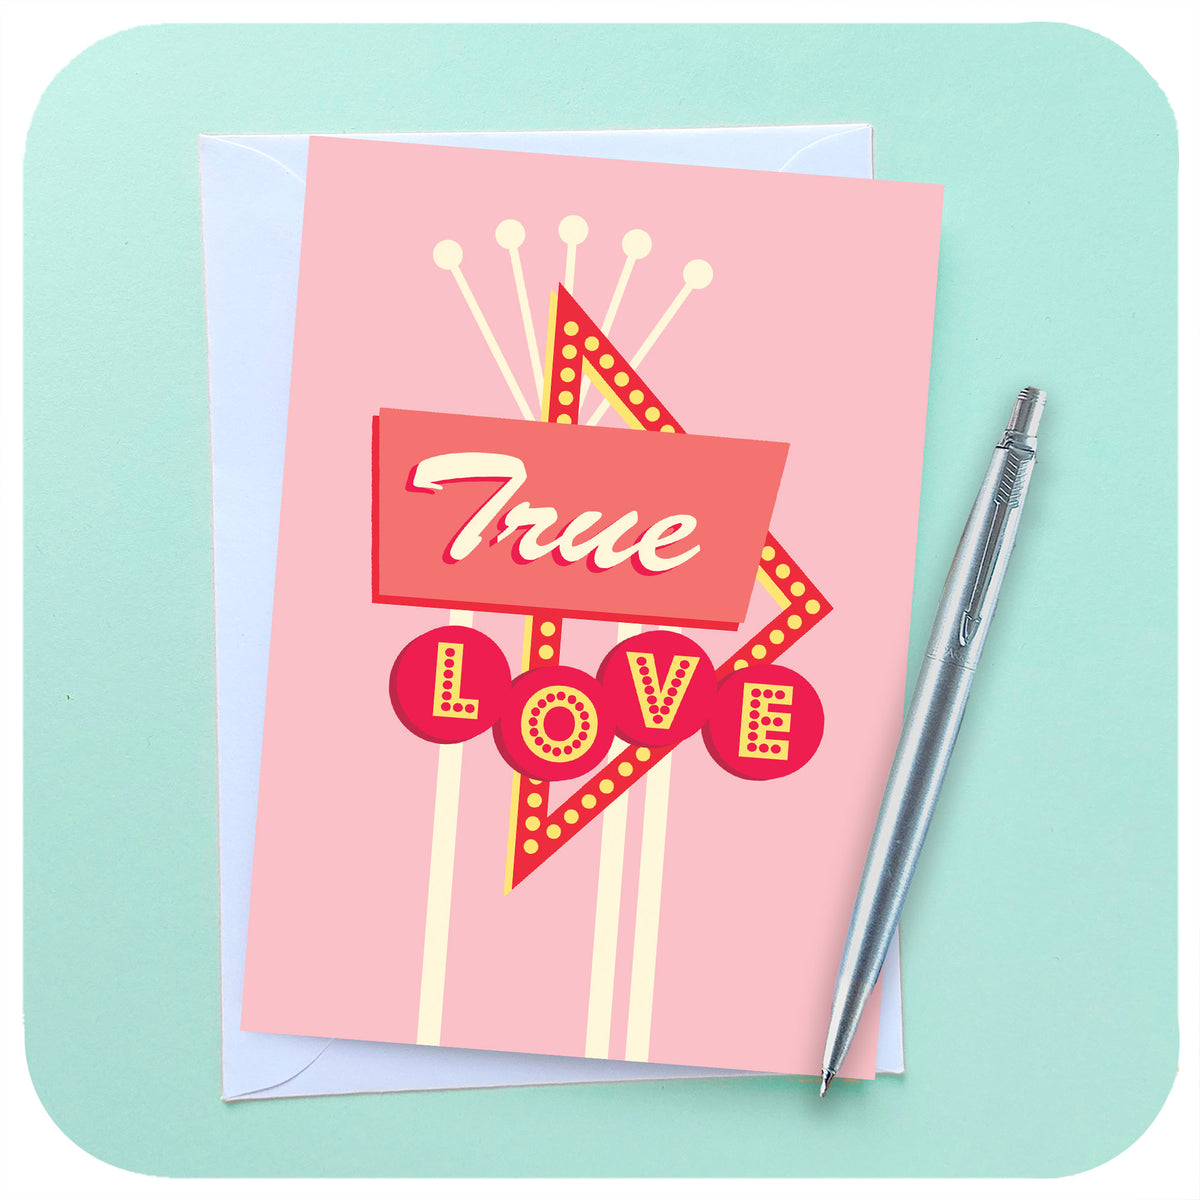 A pink A6 greetings card featuring a  graphic rendering of a 50s style American roadside neon sign with the words "True Love" sits on a white envelope beside a chrome pen on a light blue background | The Inkabilly Emporium